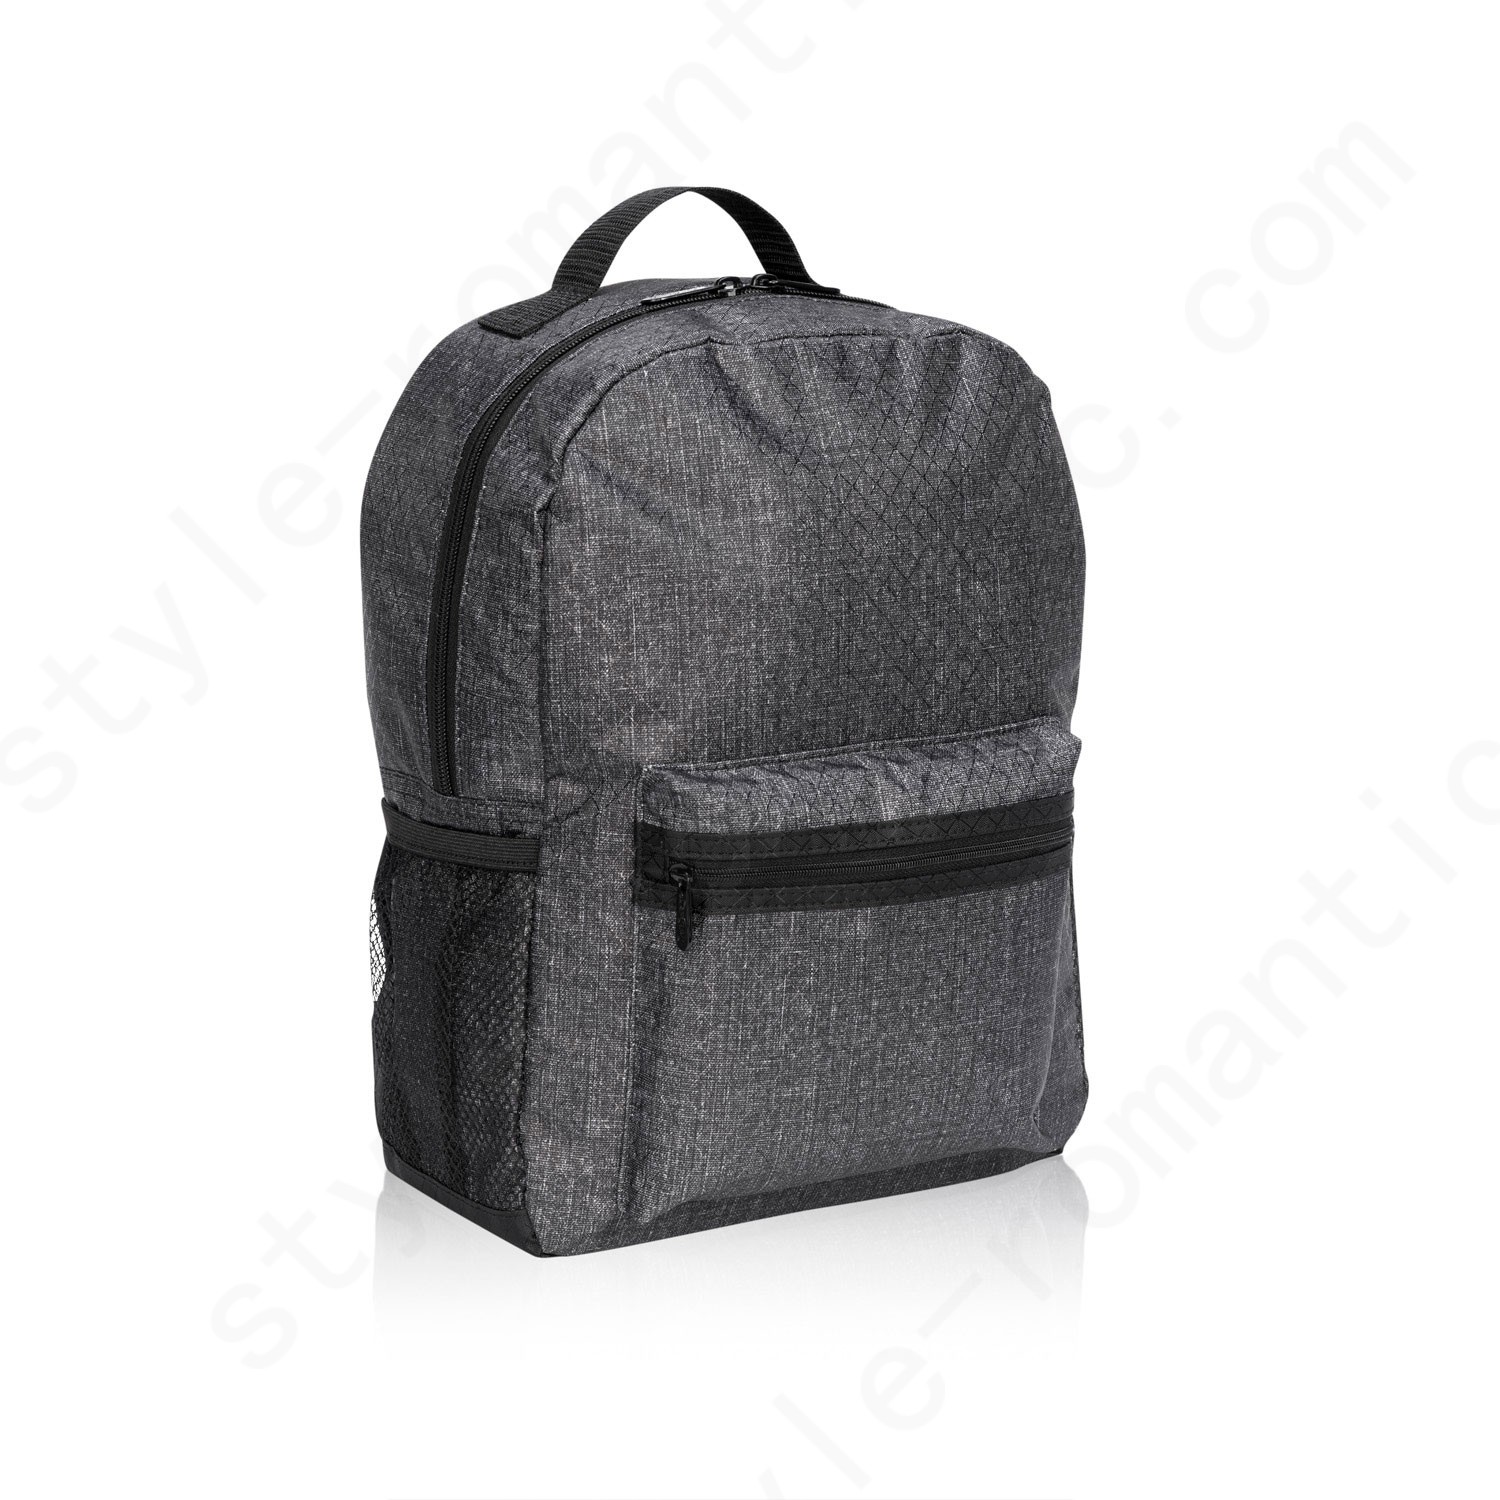 Thirty-One Gifts Lil' Go Backpack - Charcoal Crosshatch - Thirty-One Gifts Lil' Go Backpack - Charcoal Crosshatch